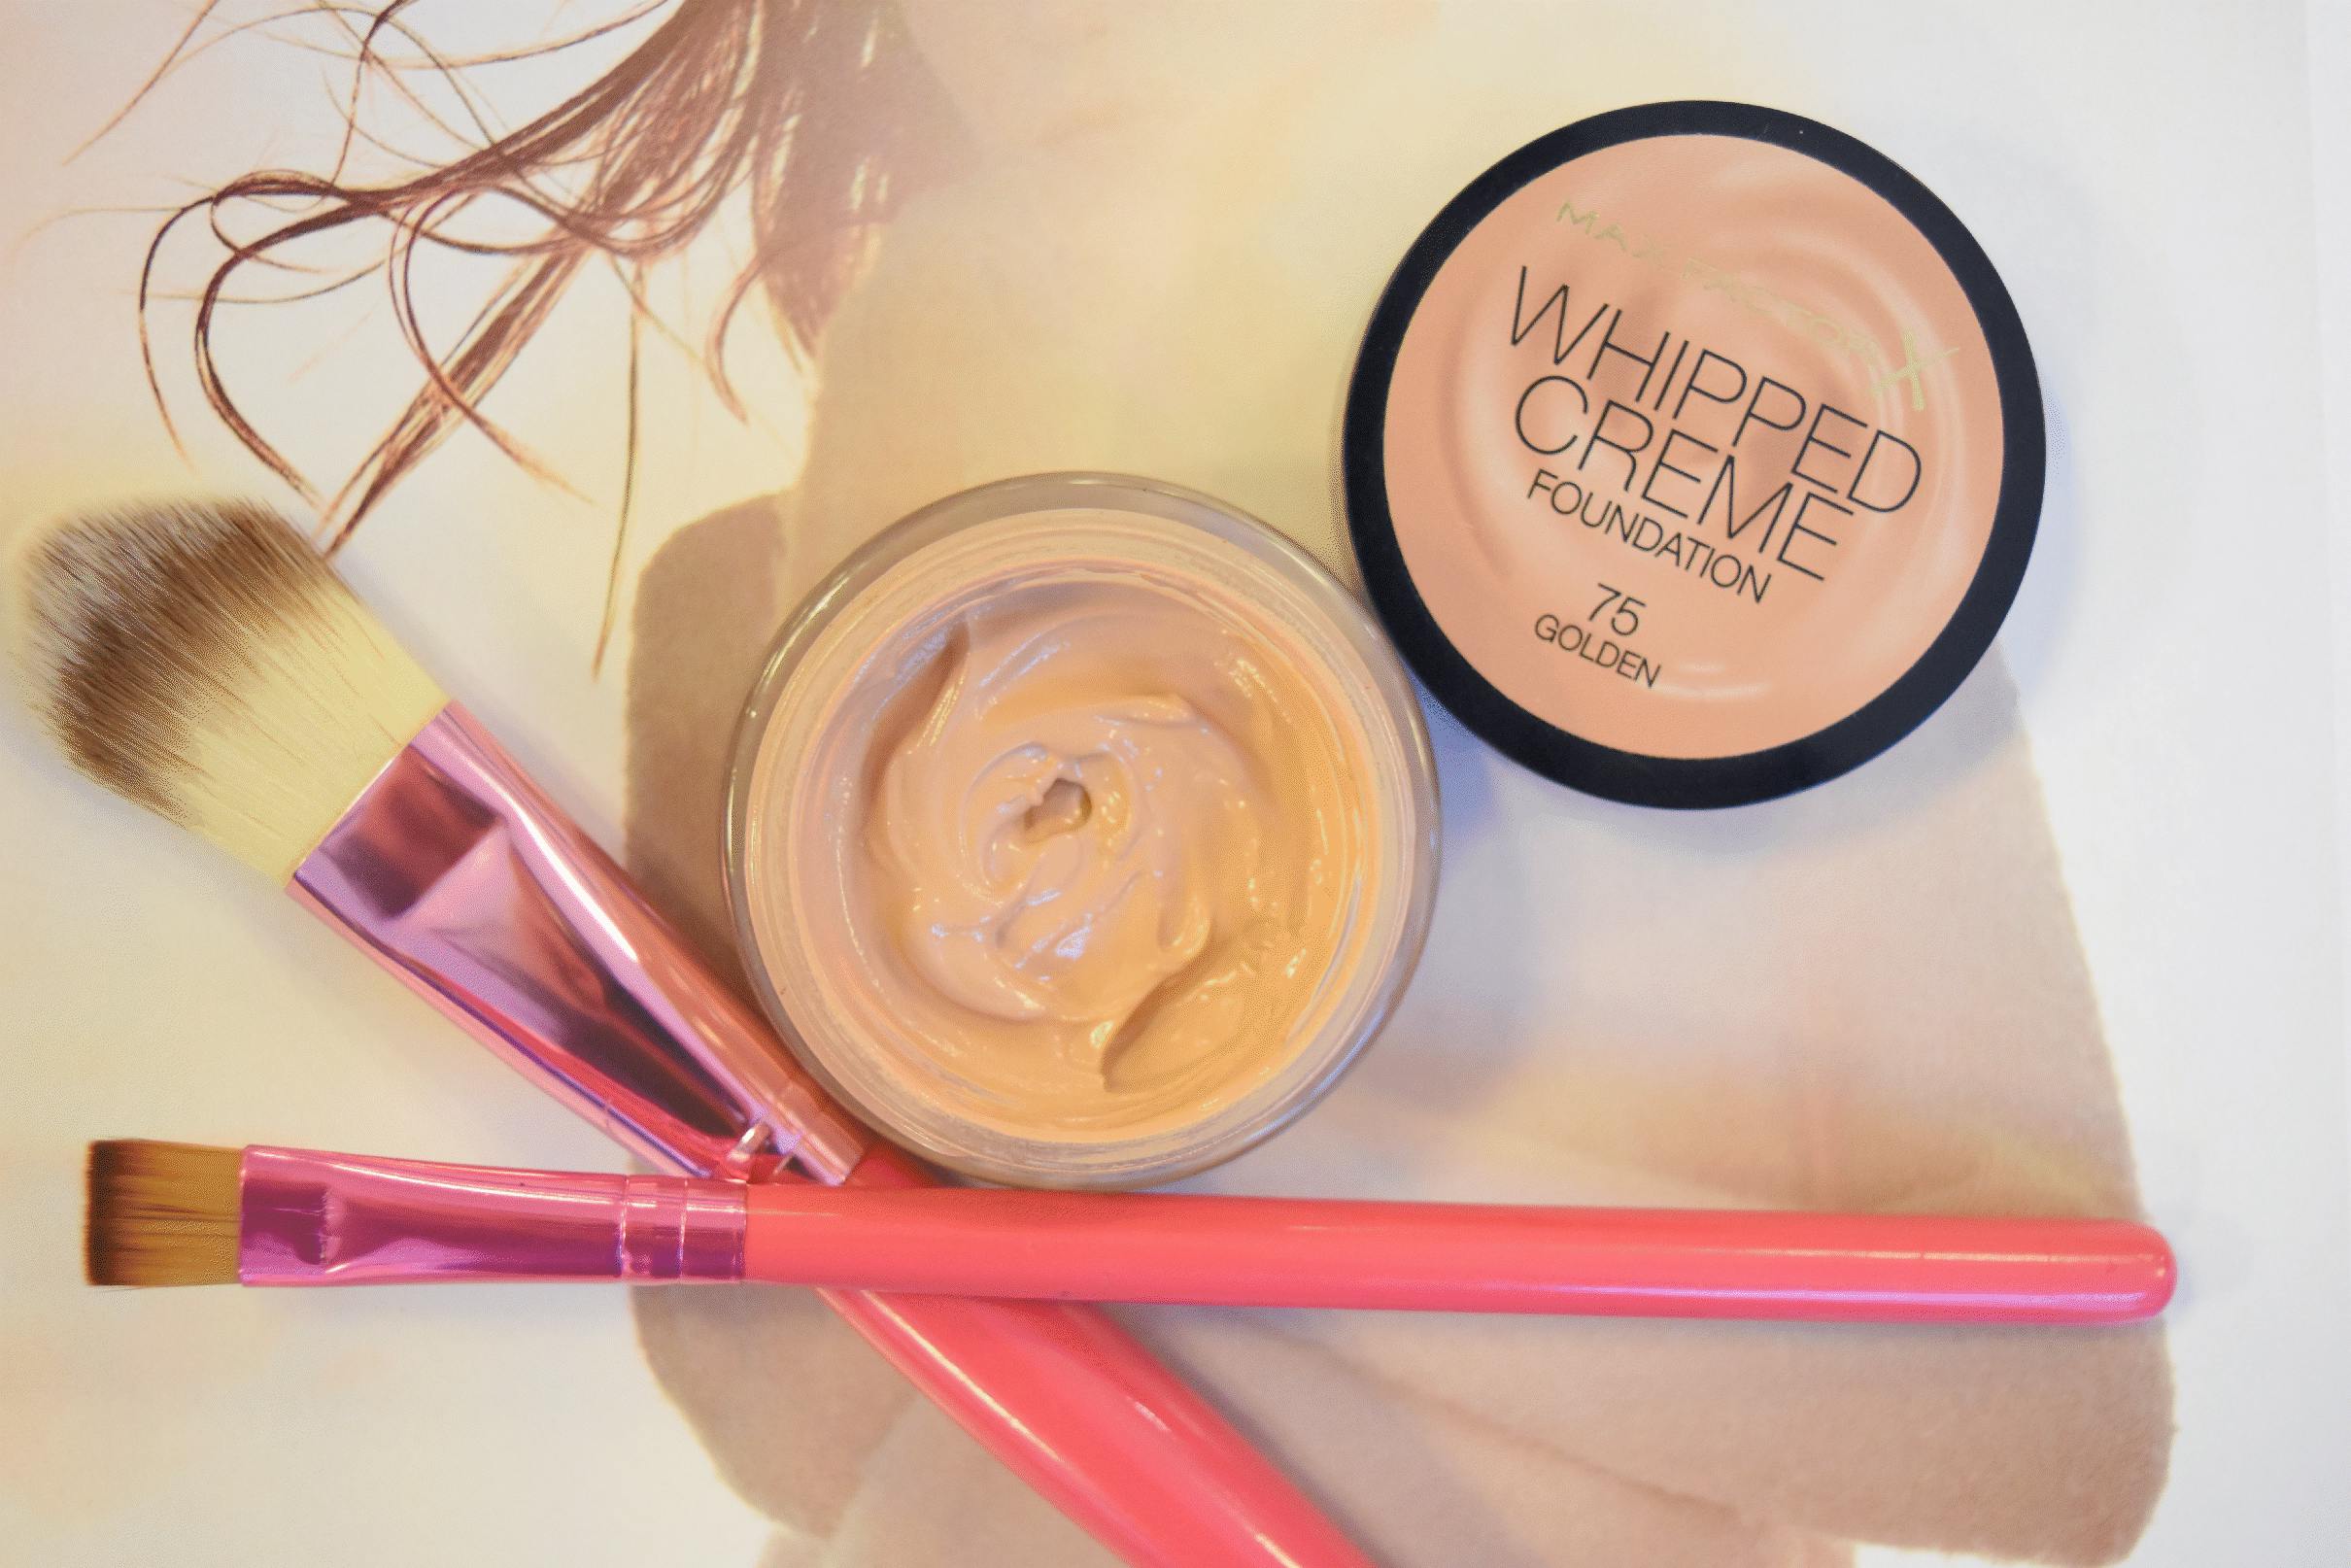 Max Factors Whipped Creme, max factor foundation, billig foundation, 